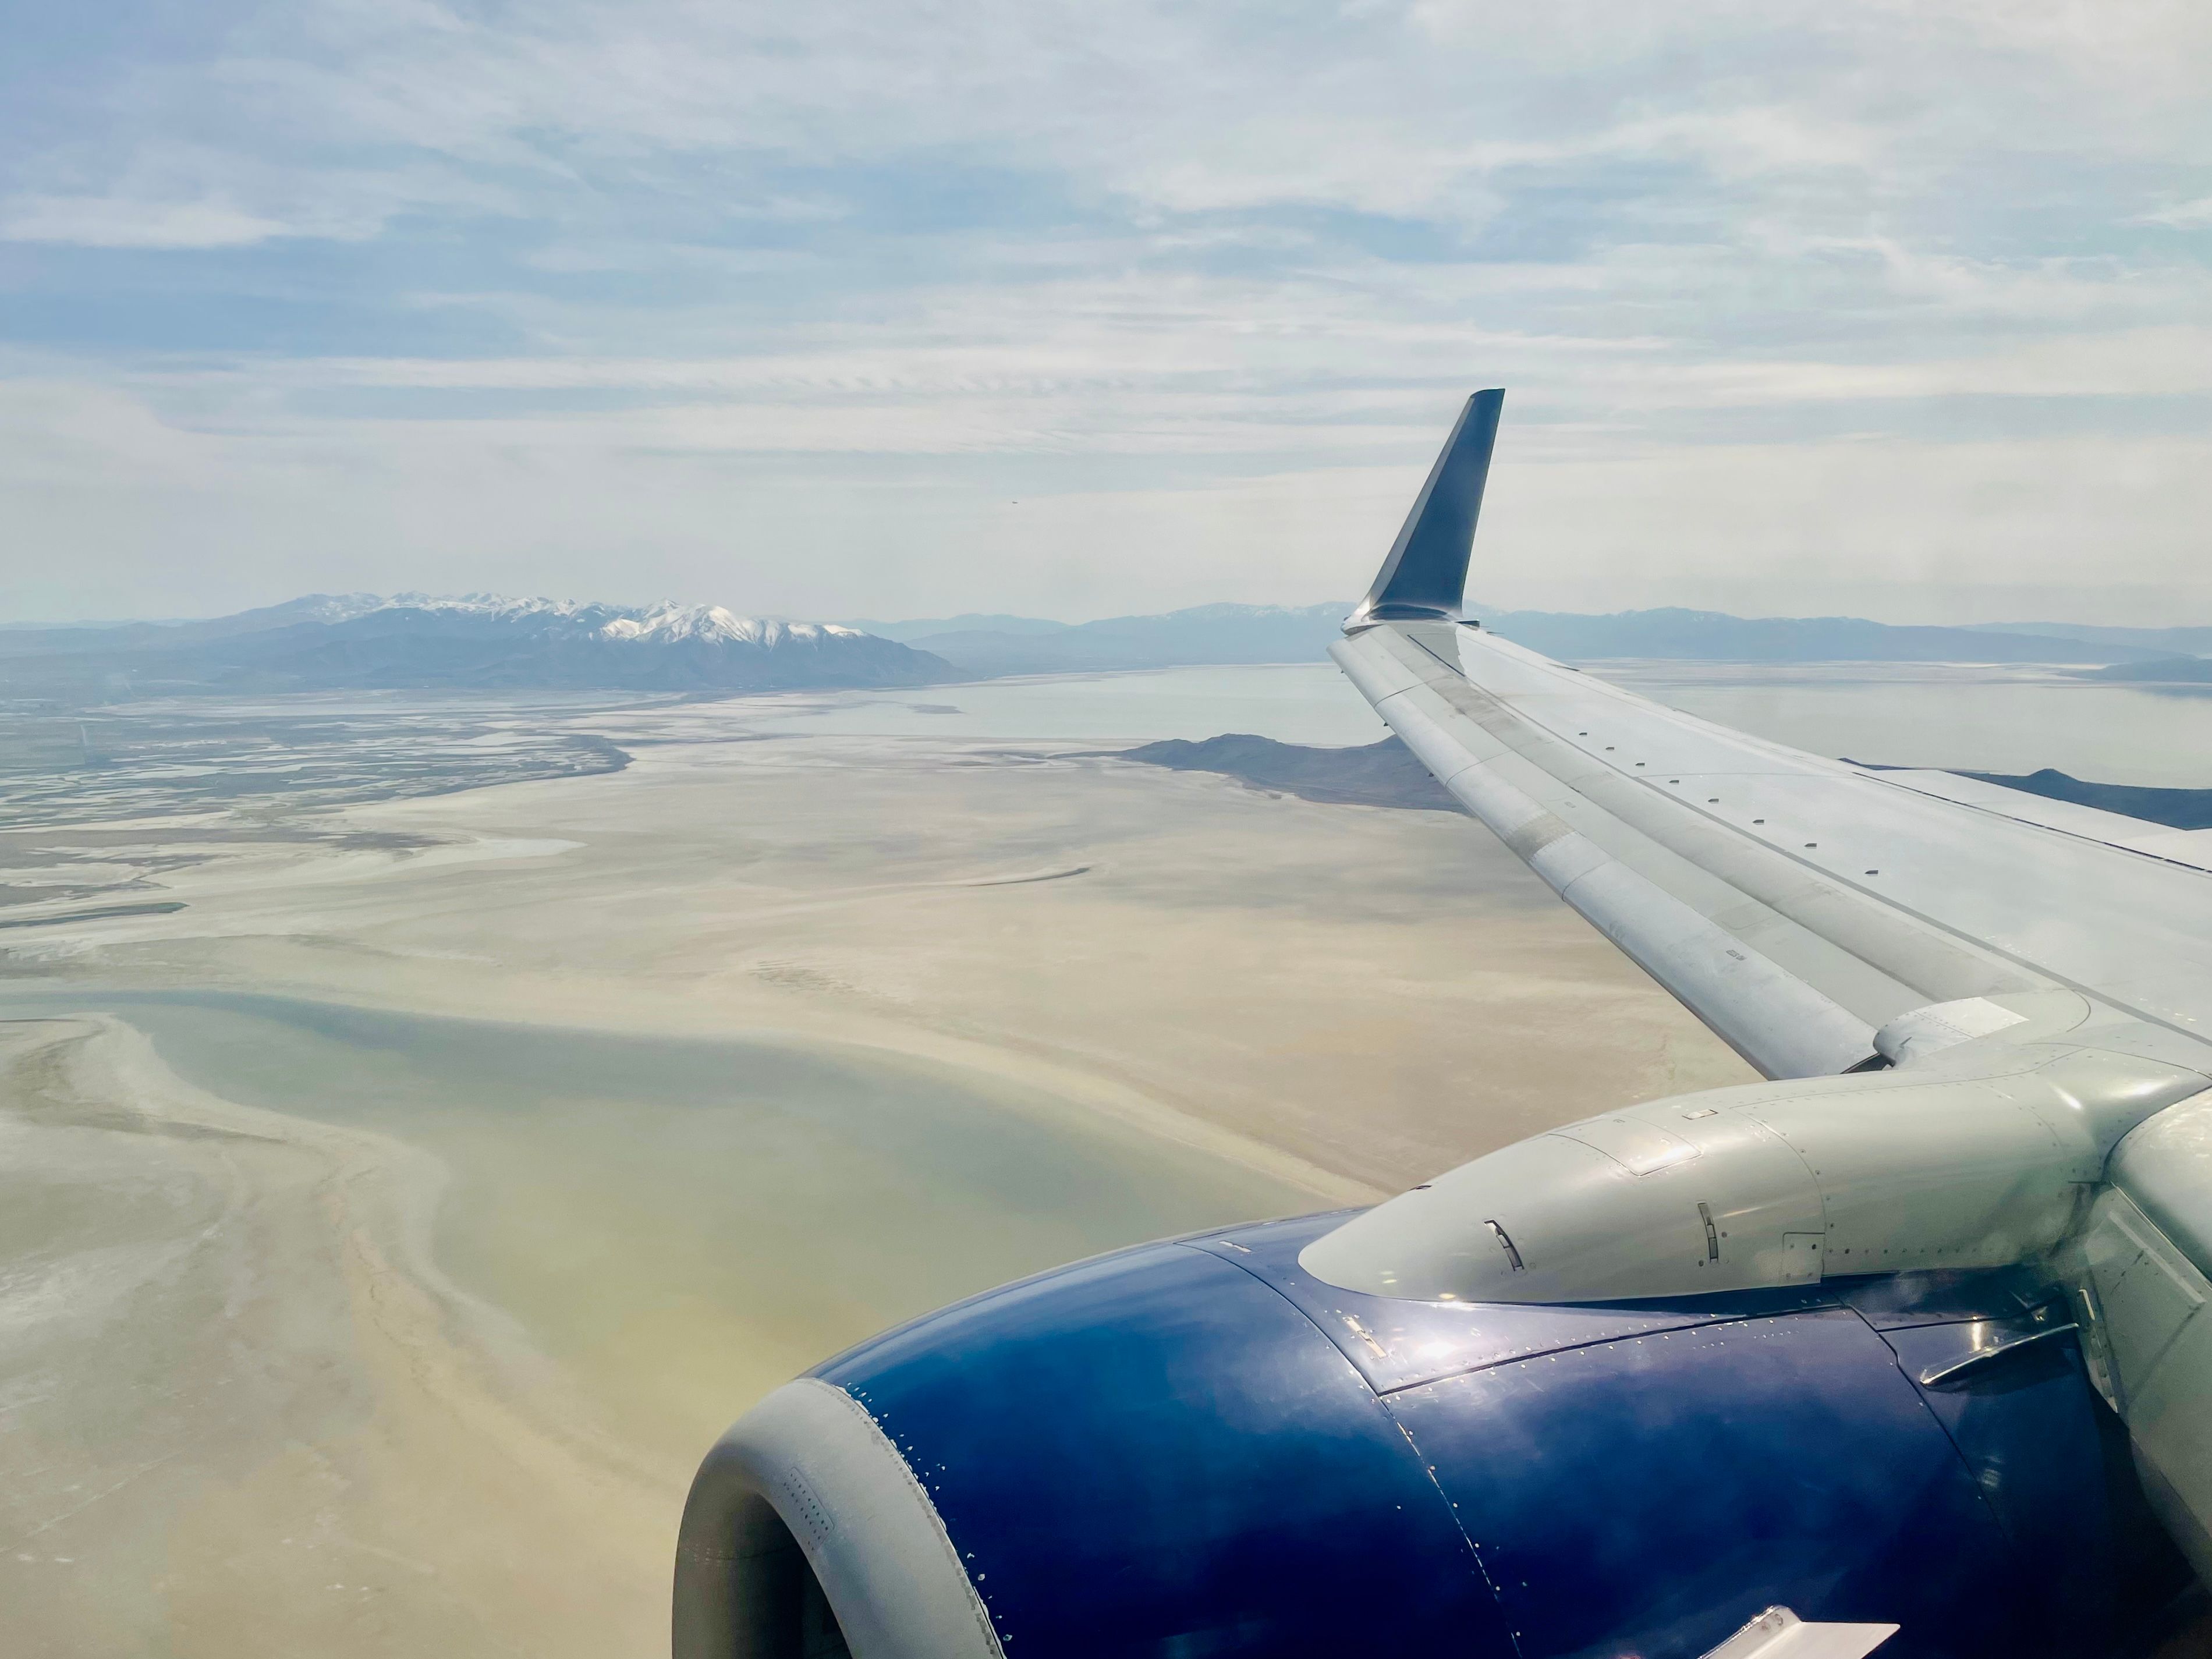 Incredible views from outside the window of an aircraft preparing to land at Salt Lake City airport.